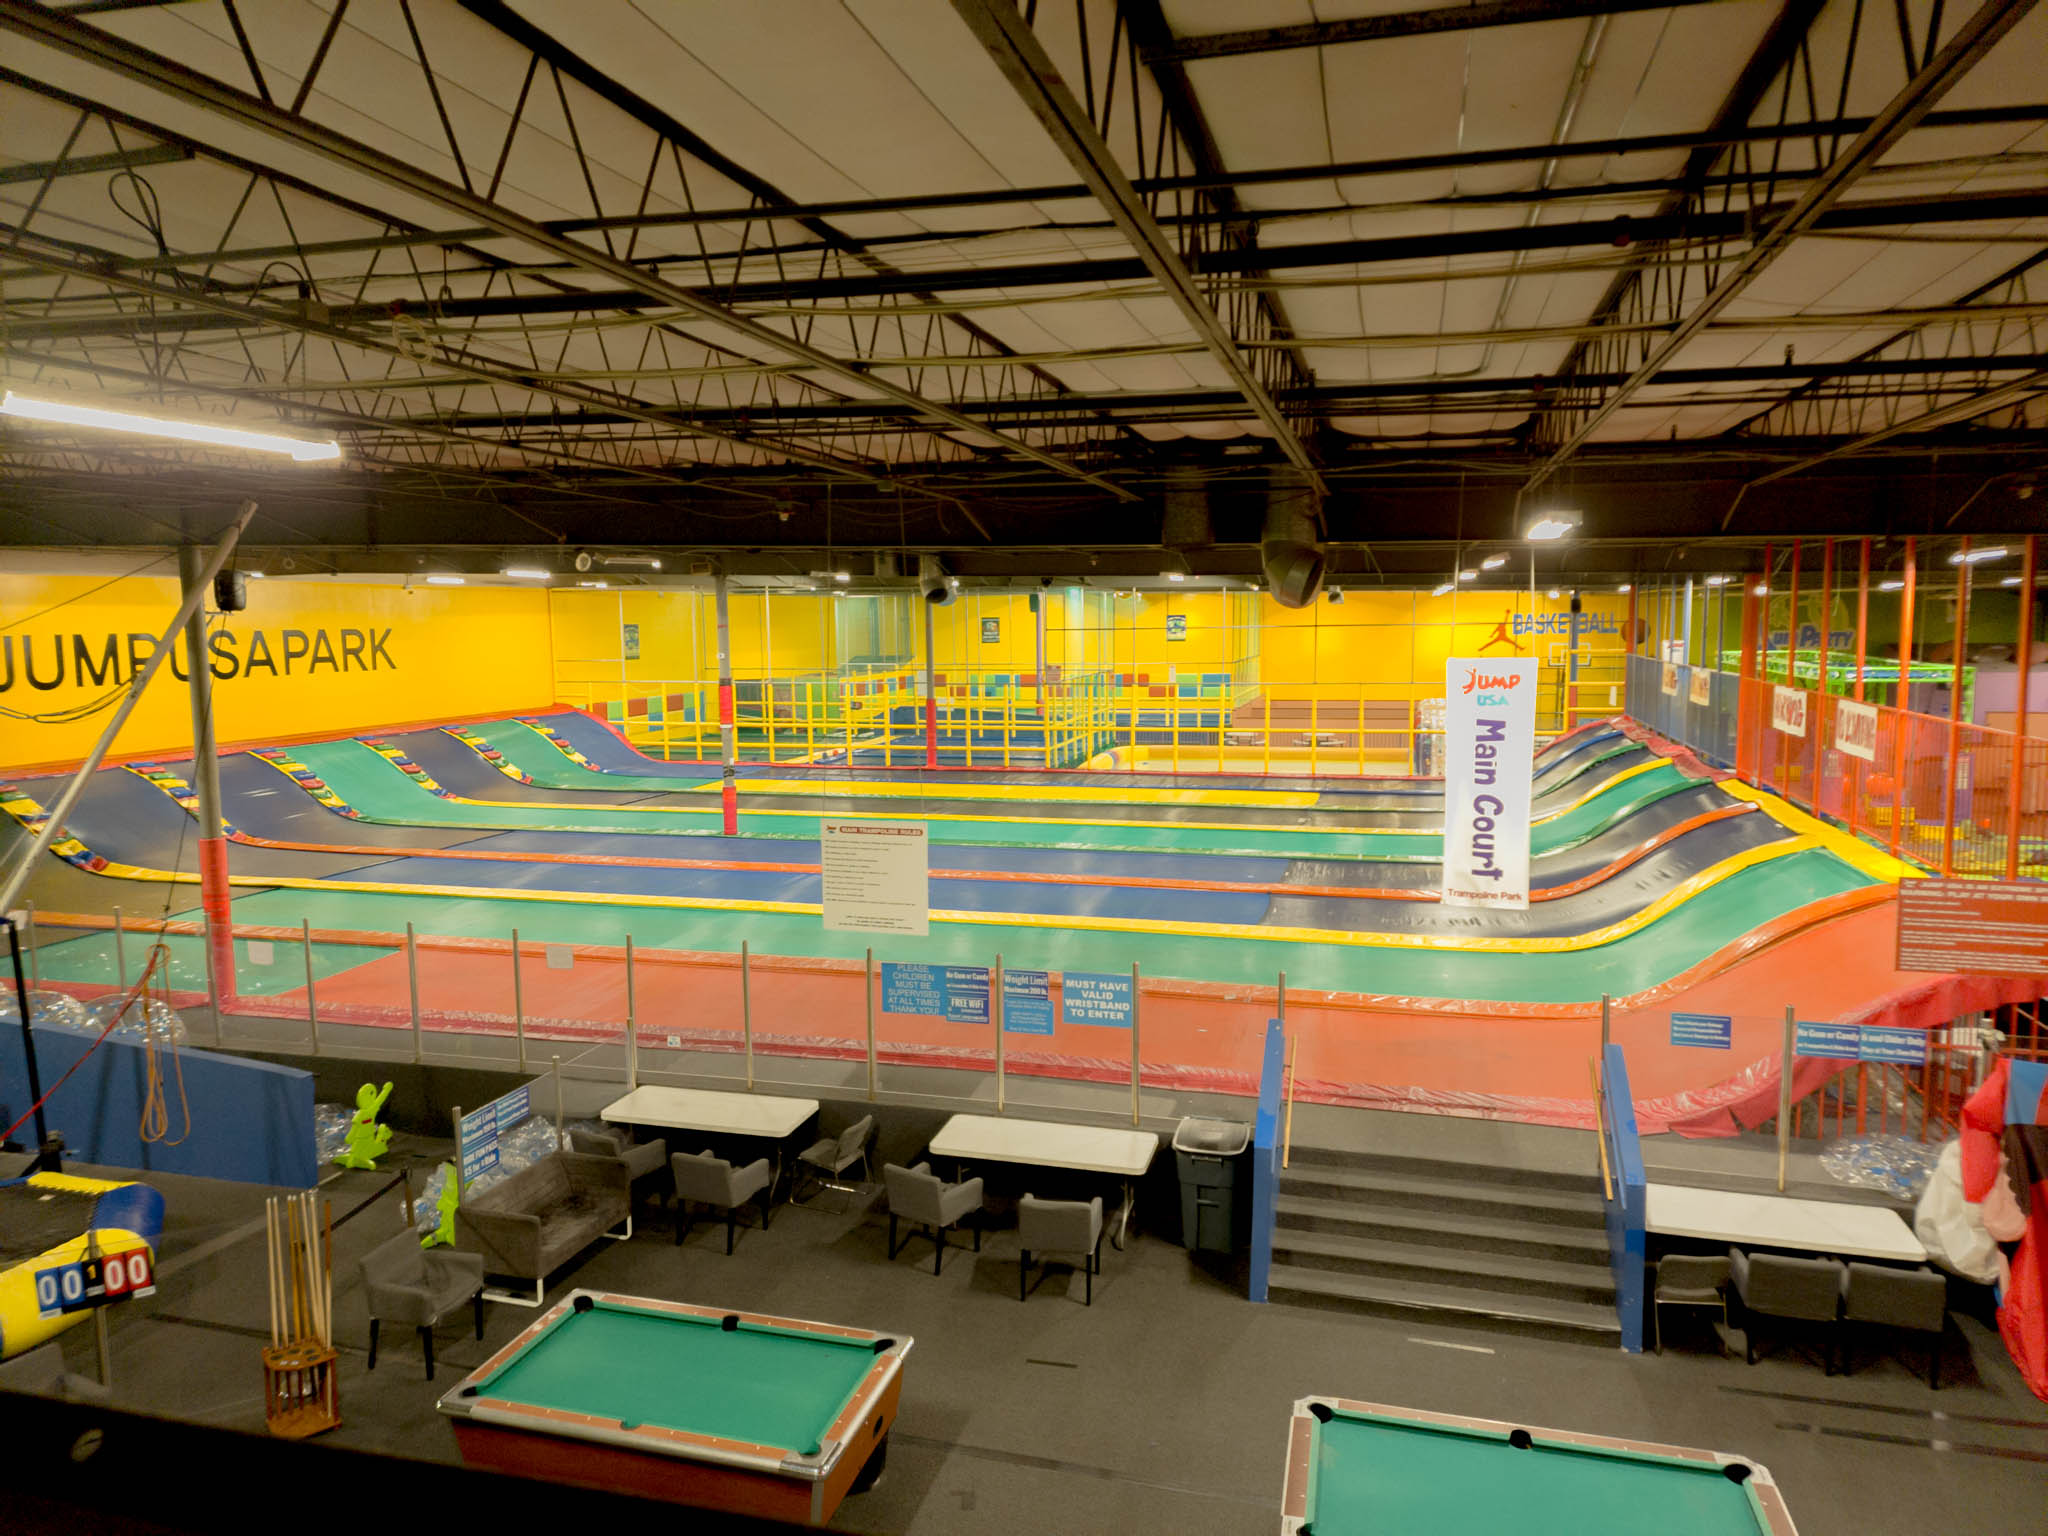 Aerial view of Jump Party USA's Seven Giant Trampoline Lanes perfect for adults to jump on